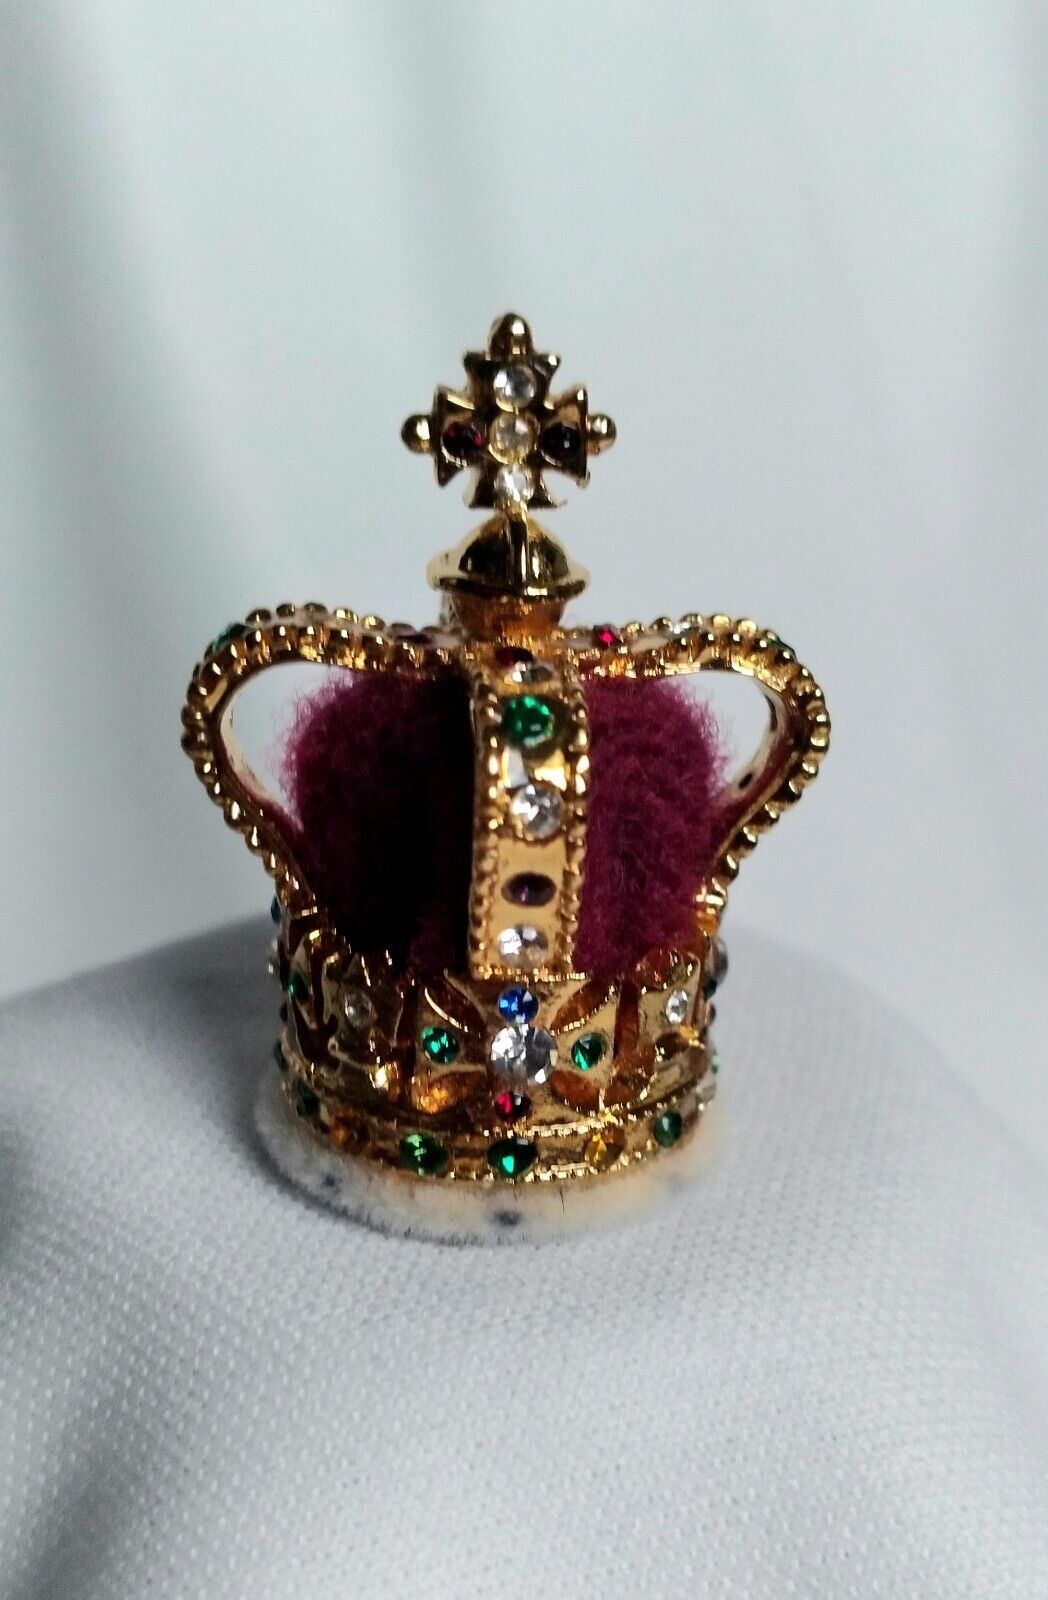 Vintage St. Edward\'s Crown Miniature Replica Jewel Royal House Collection In Box